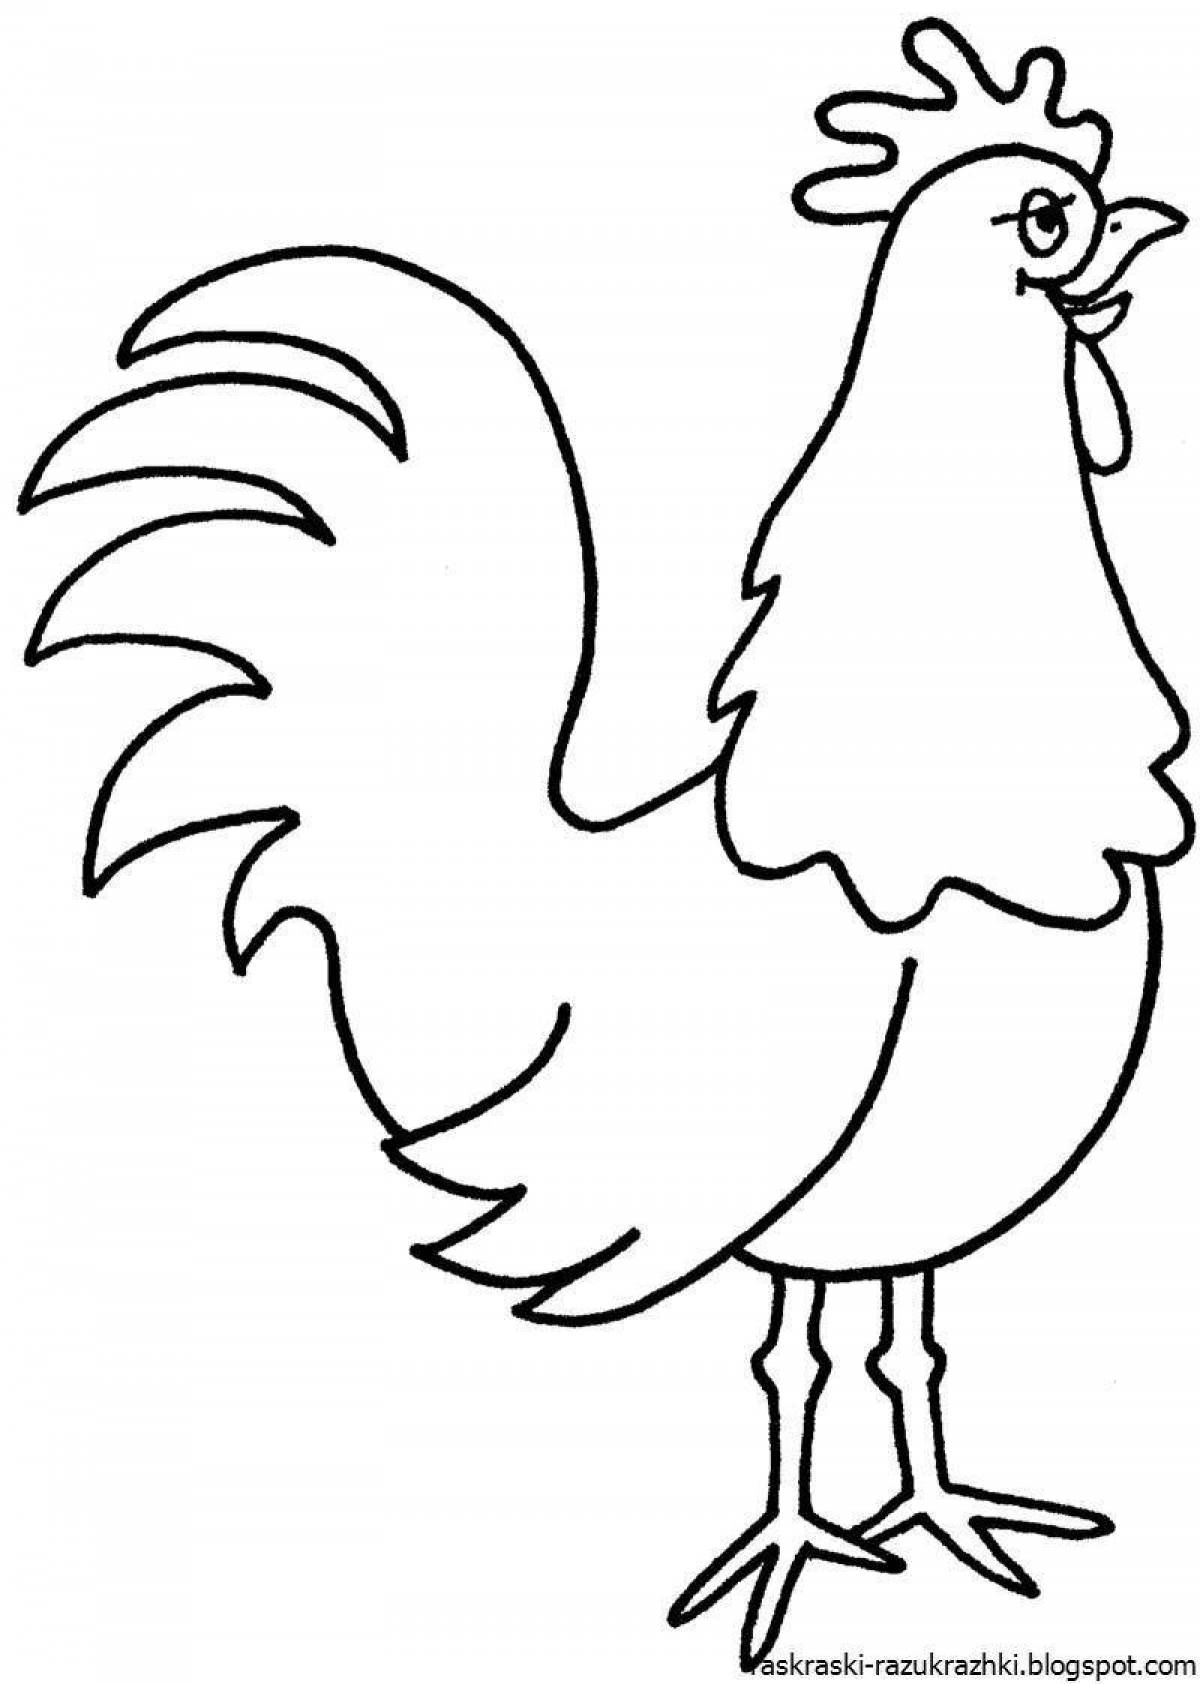 Coloring book witty rooster